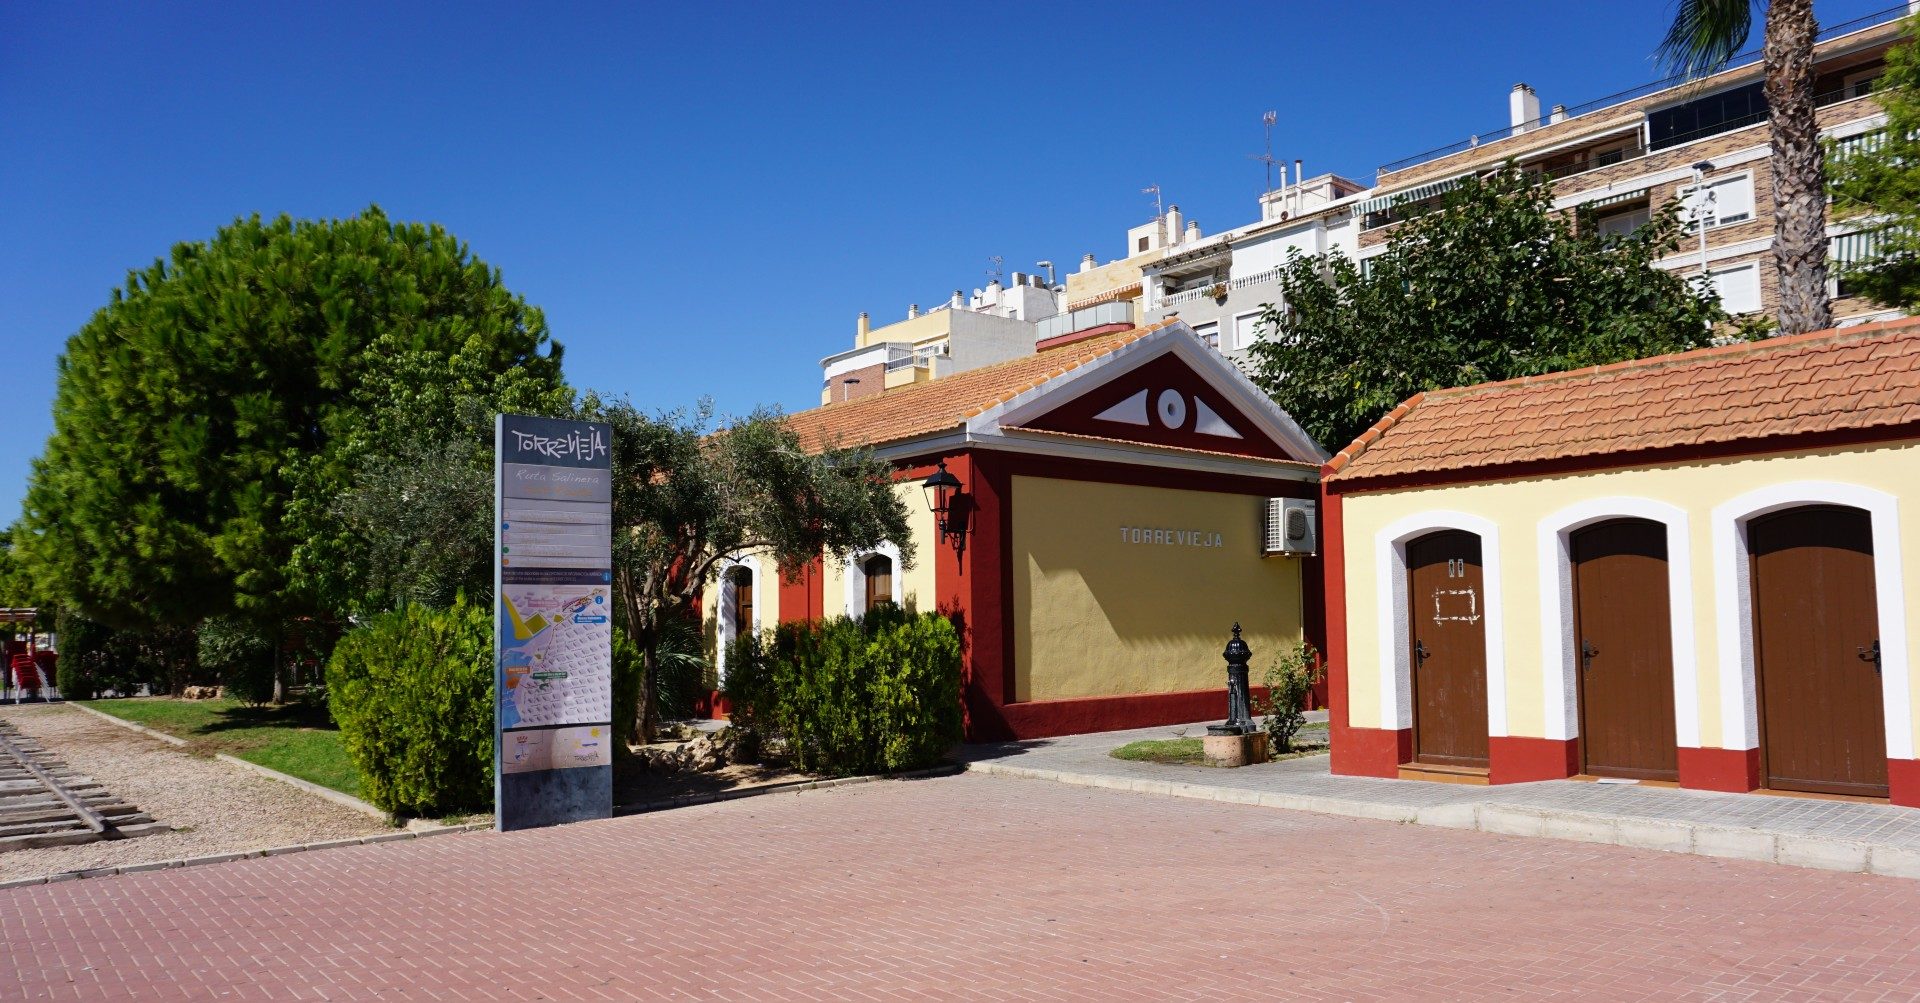 Torrevieja station closed in 1970